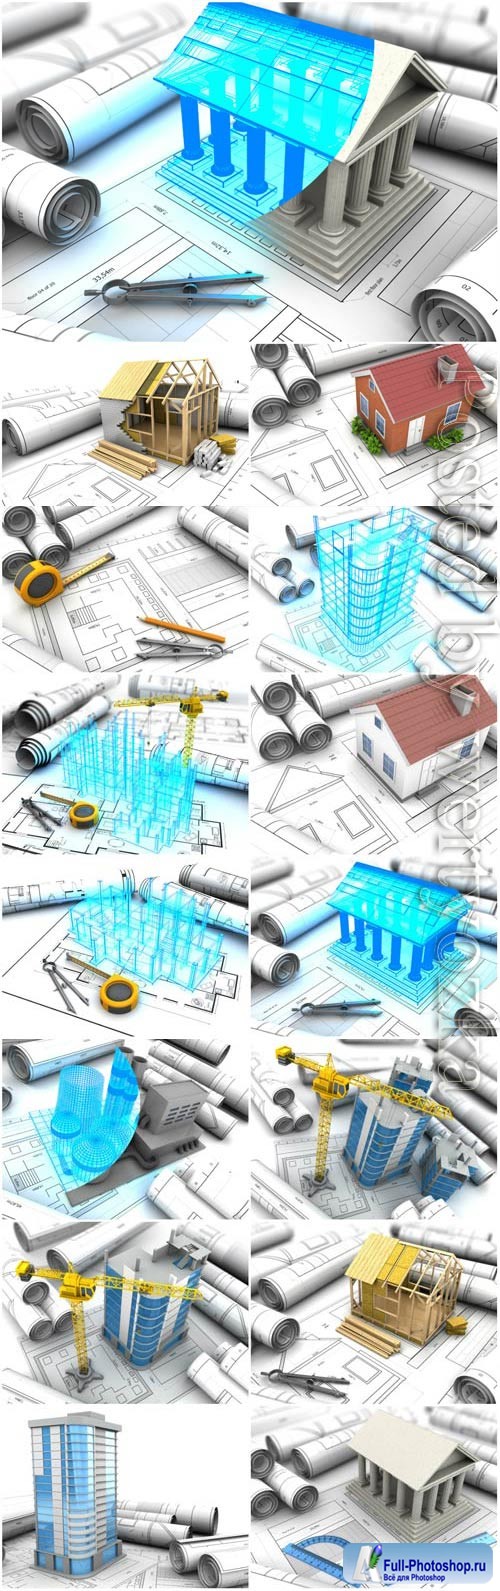 Architecture and construction drawings stock photo